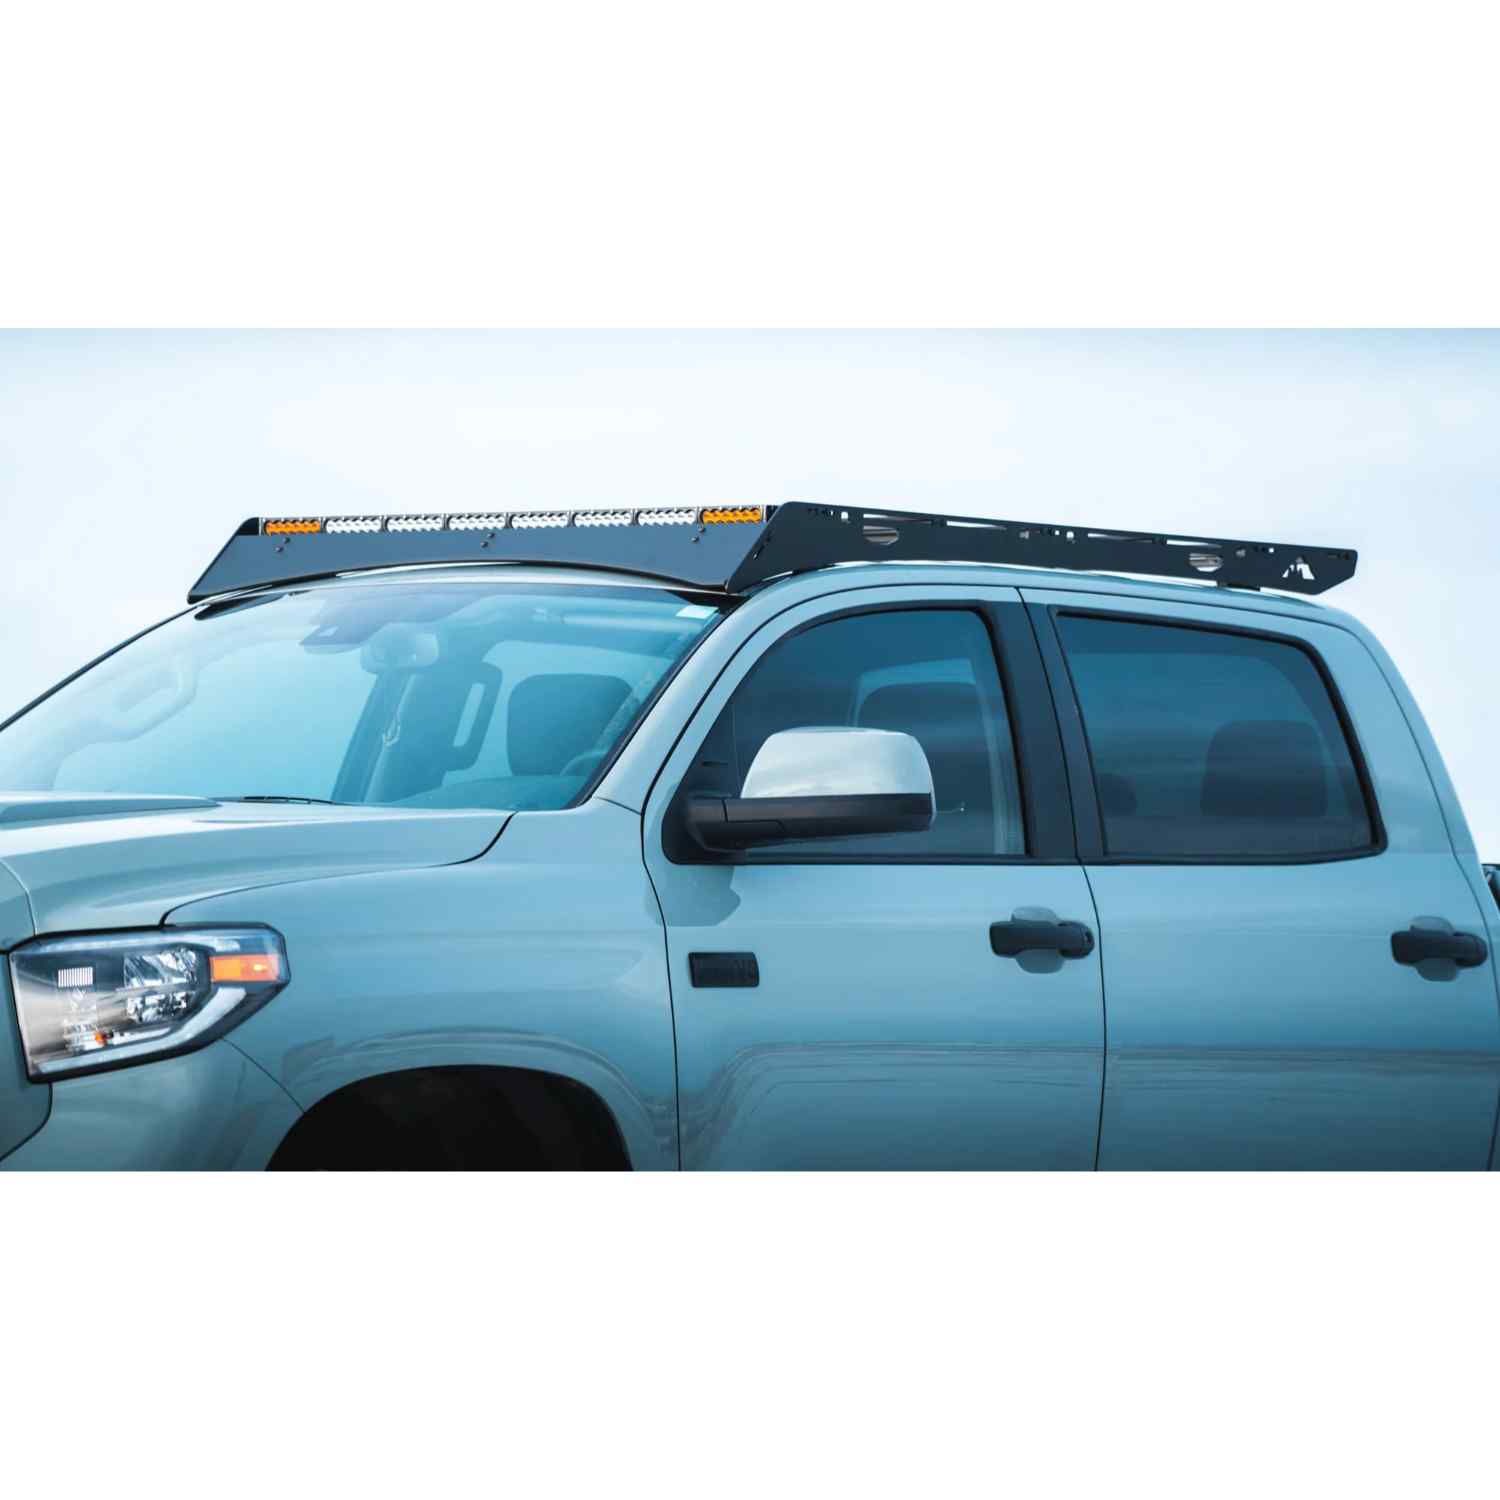 Sherpa Big Bear 2007-2021 Toyota Tundra CrewMax Roof Rack fRONT vIEW